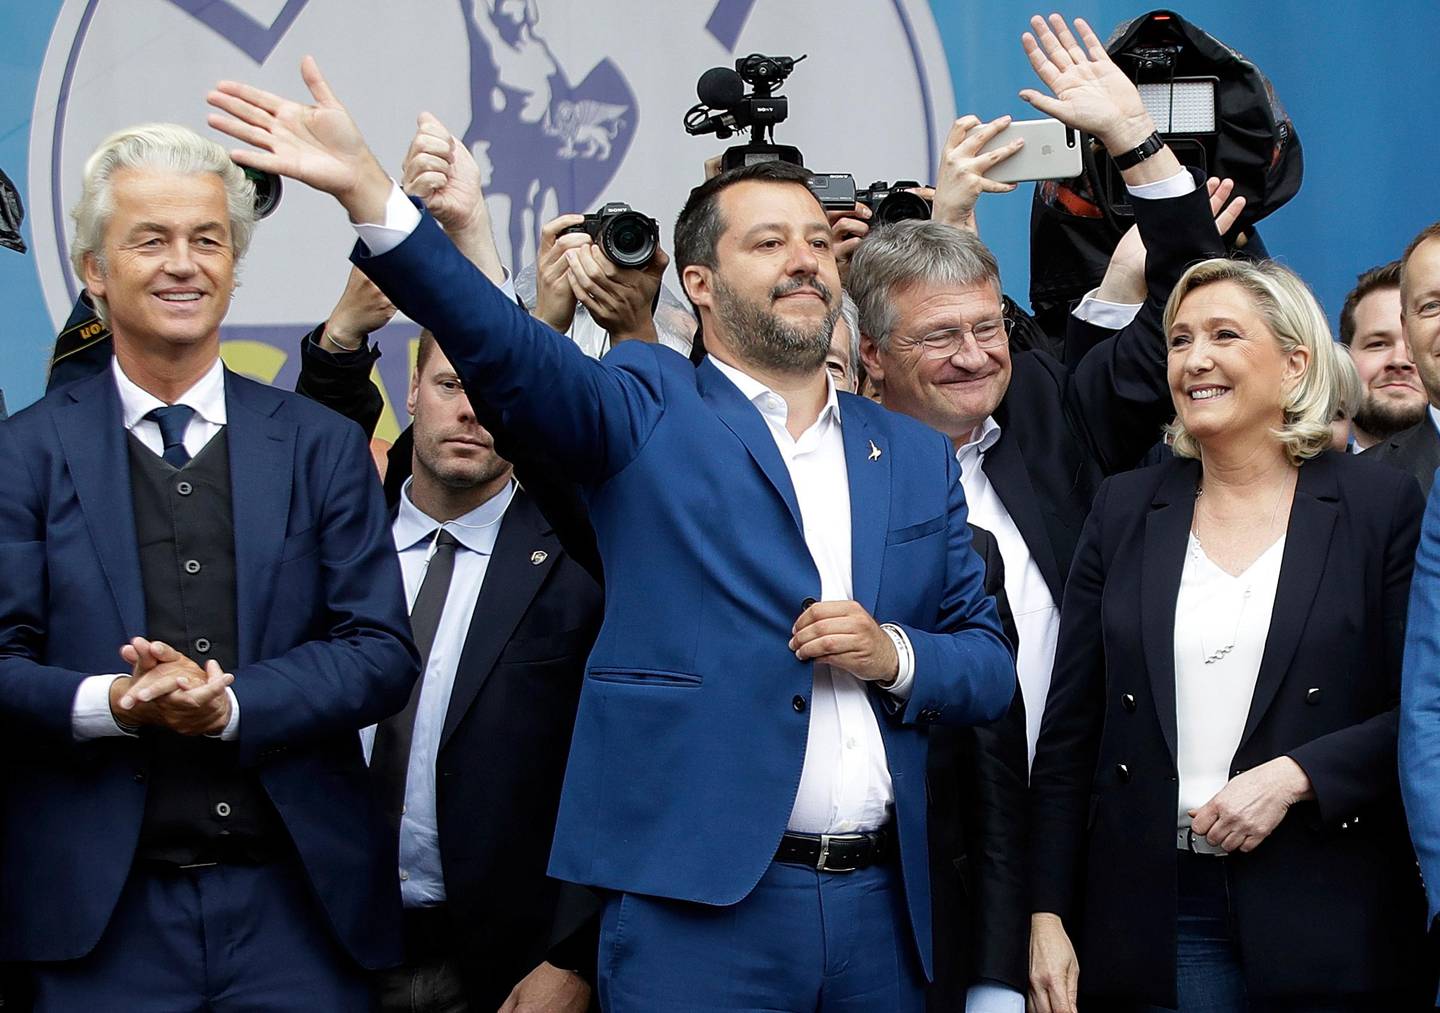 From left, Geert Wilders, leader of Dutch Party for Freedom, Matteo Salvini, Jörg Meuthen, leader of Alternative For Germany party, and Marine Le Pen, attend a rally organized by League leader Matteo Salvini, with leaders of other European nationalist parties, ahead of the May 23-26 European Parliamentary elections, in Milan, Italy, Saturday, May 18, 2019. (AP Photo/Luca Bruno)